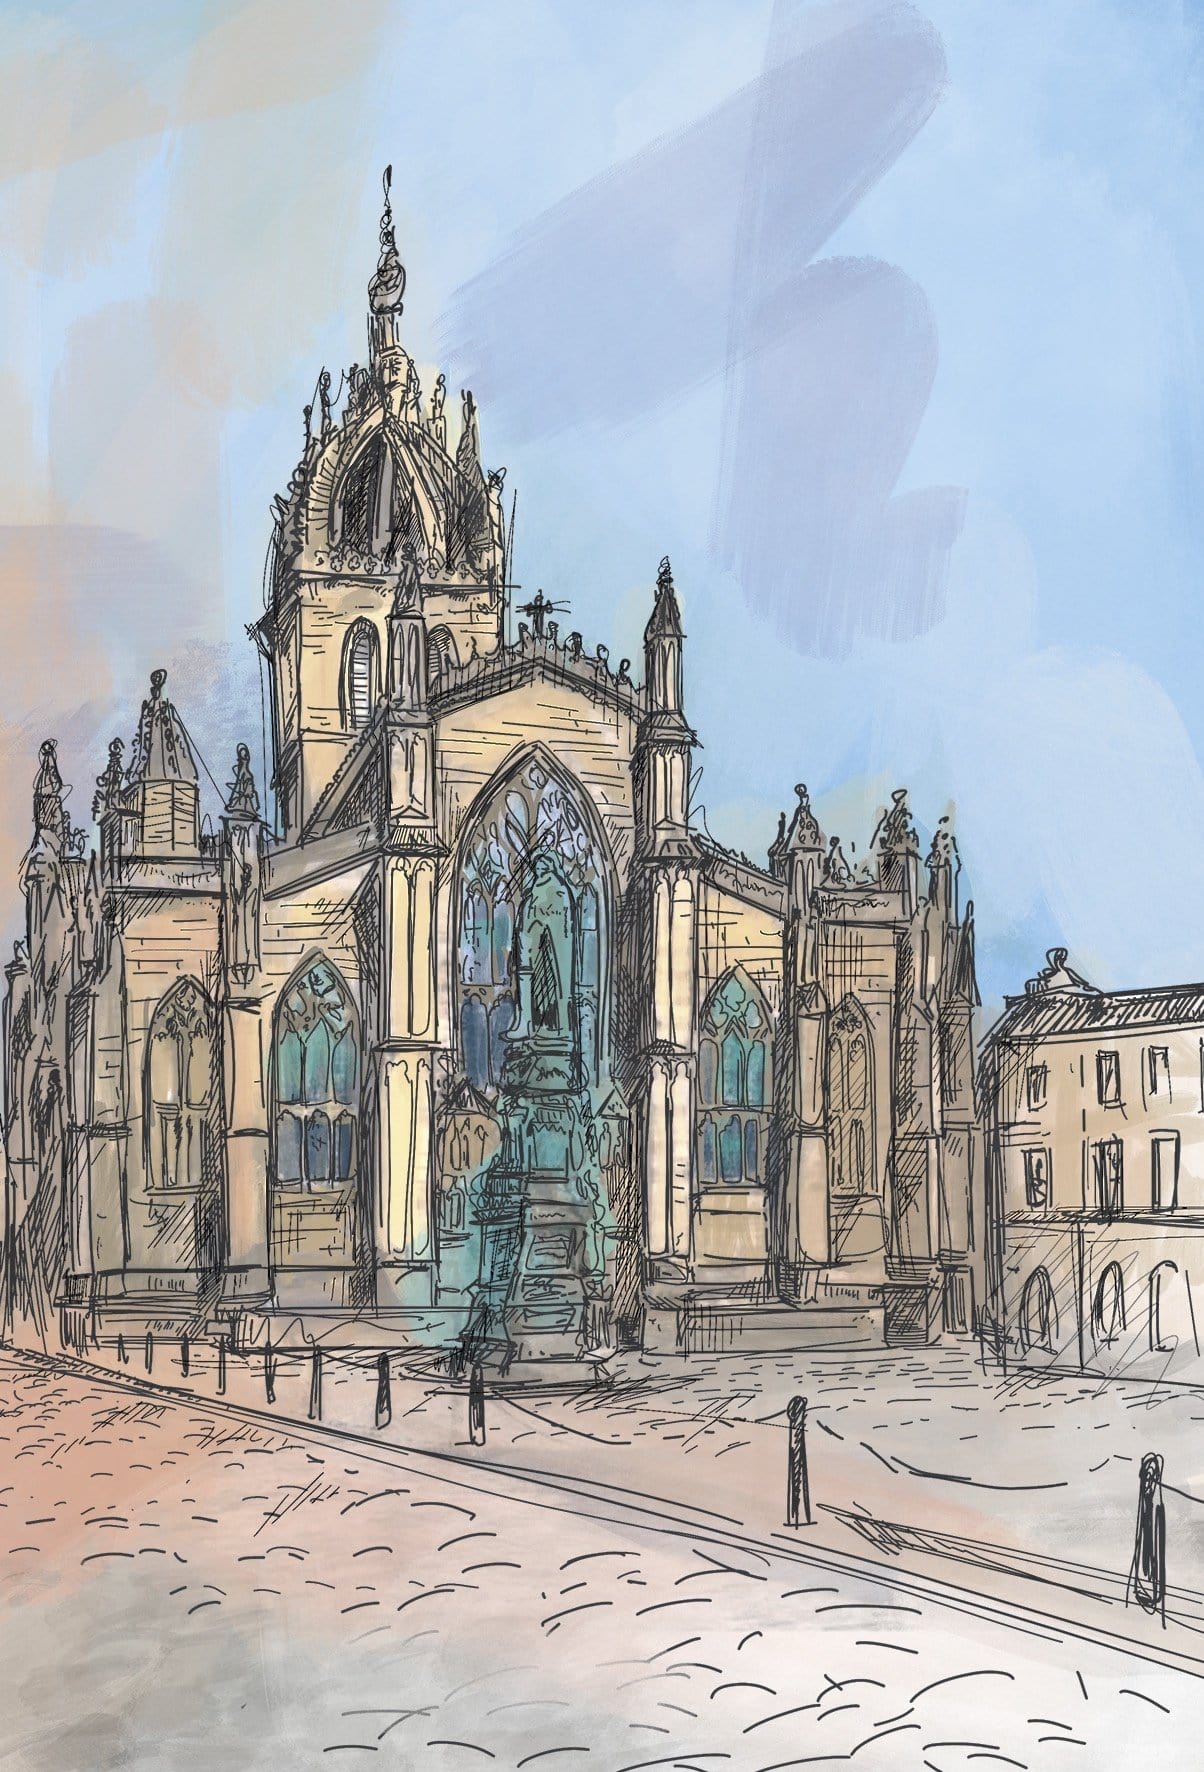 St Giles Cathedral & Parliament Square Edinburgh Greeting Card Scotland Greeting Cards Card